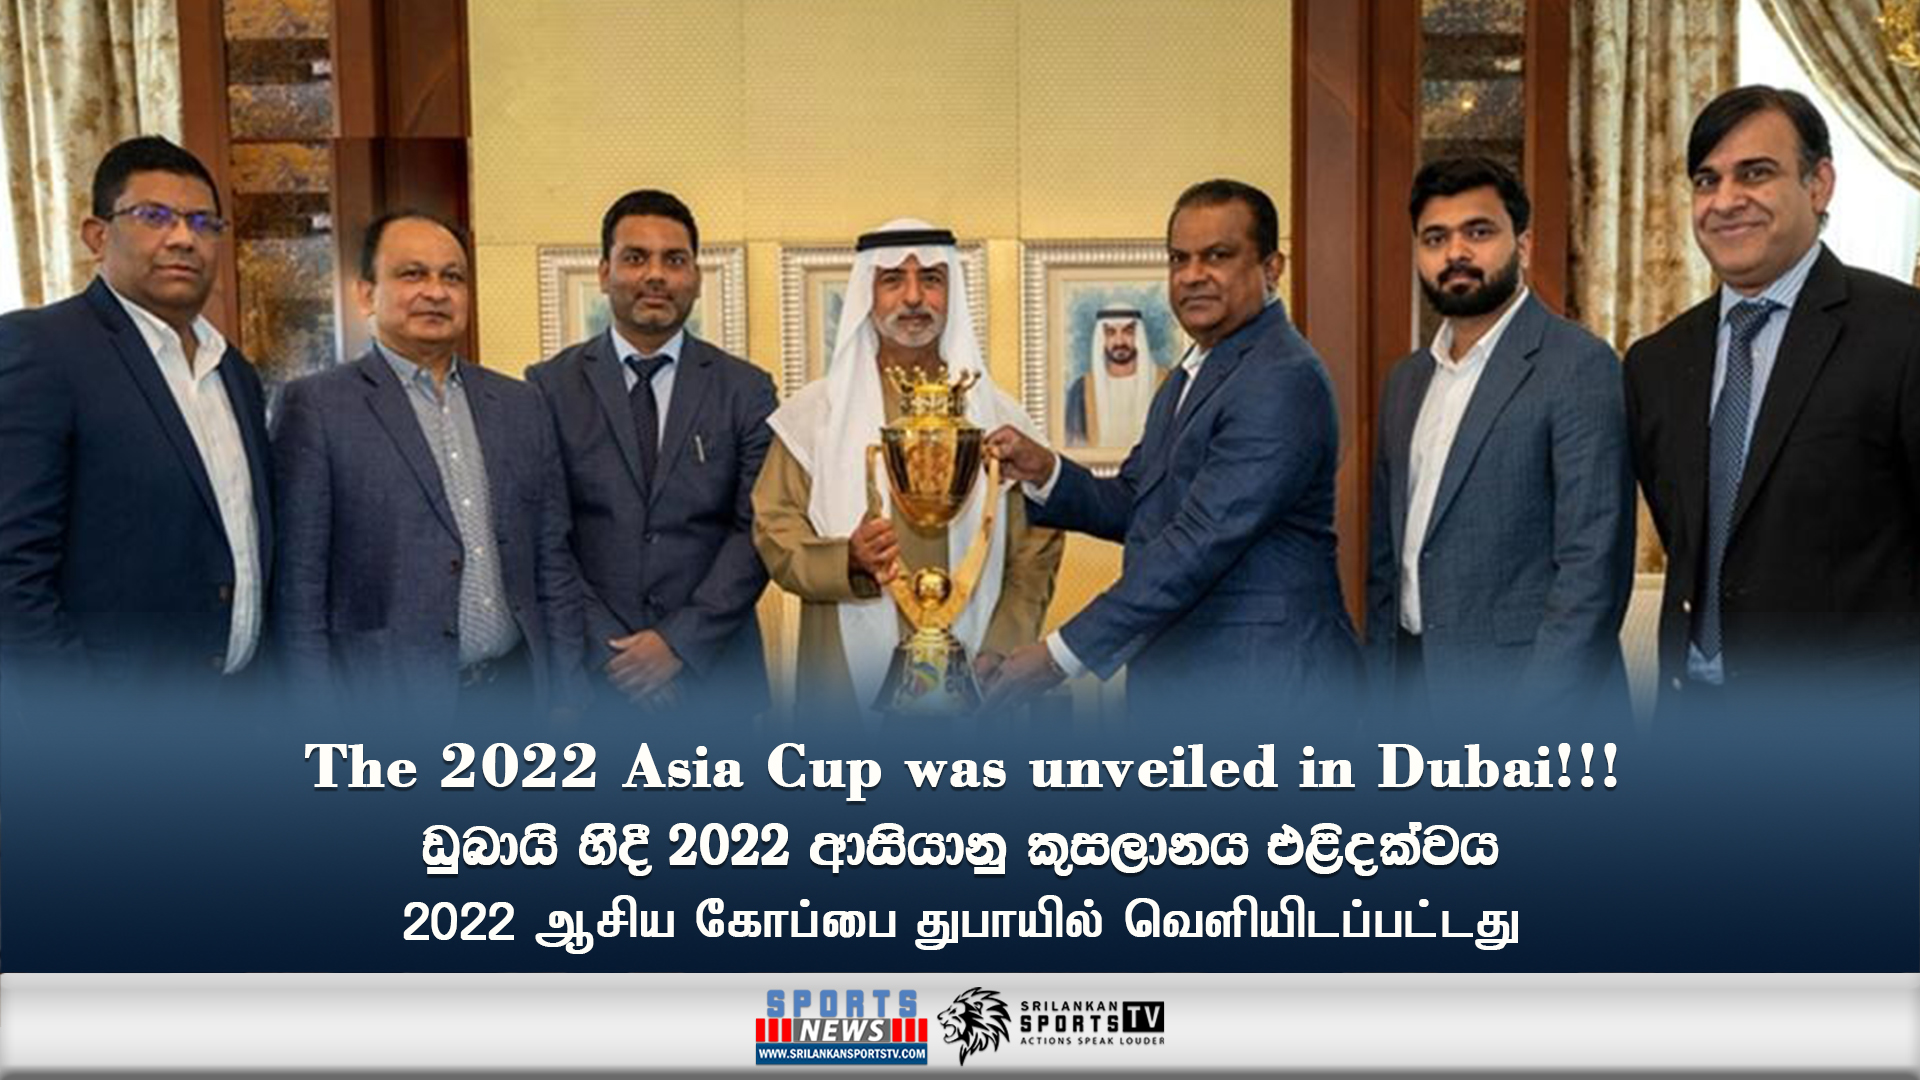 The 2022 Asia Cup was unveiled in Dubai!!!